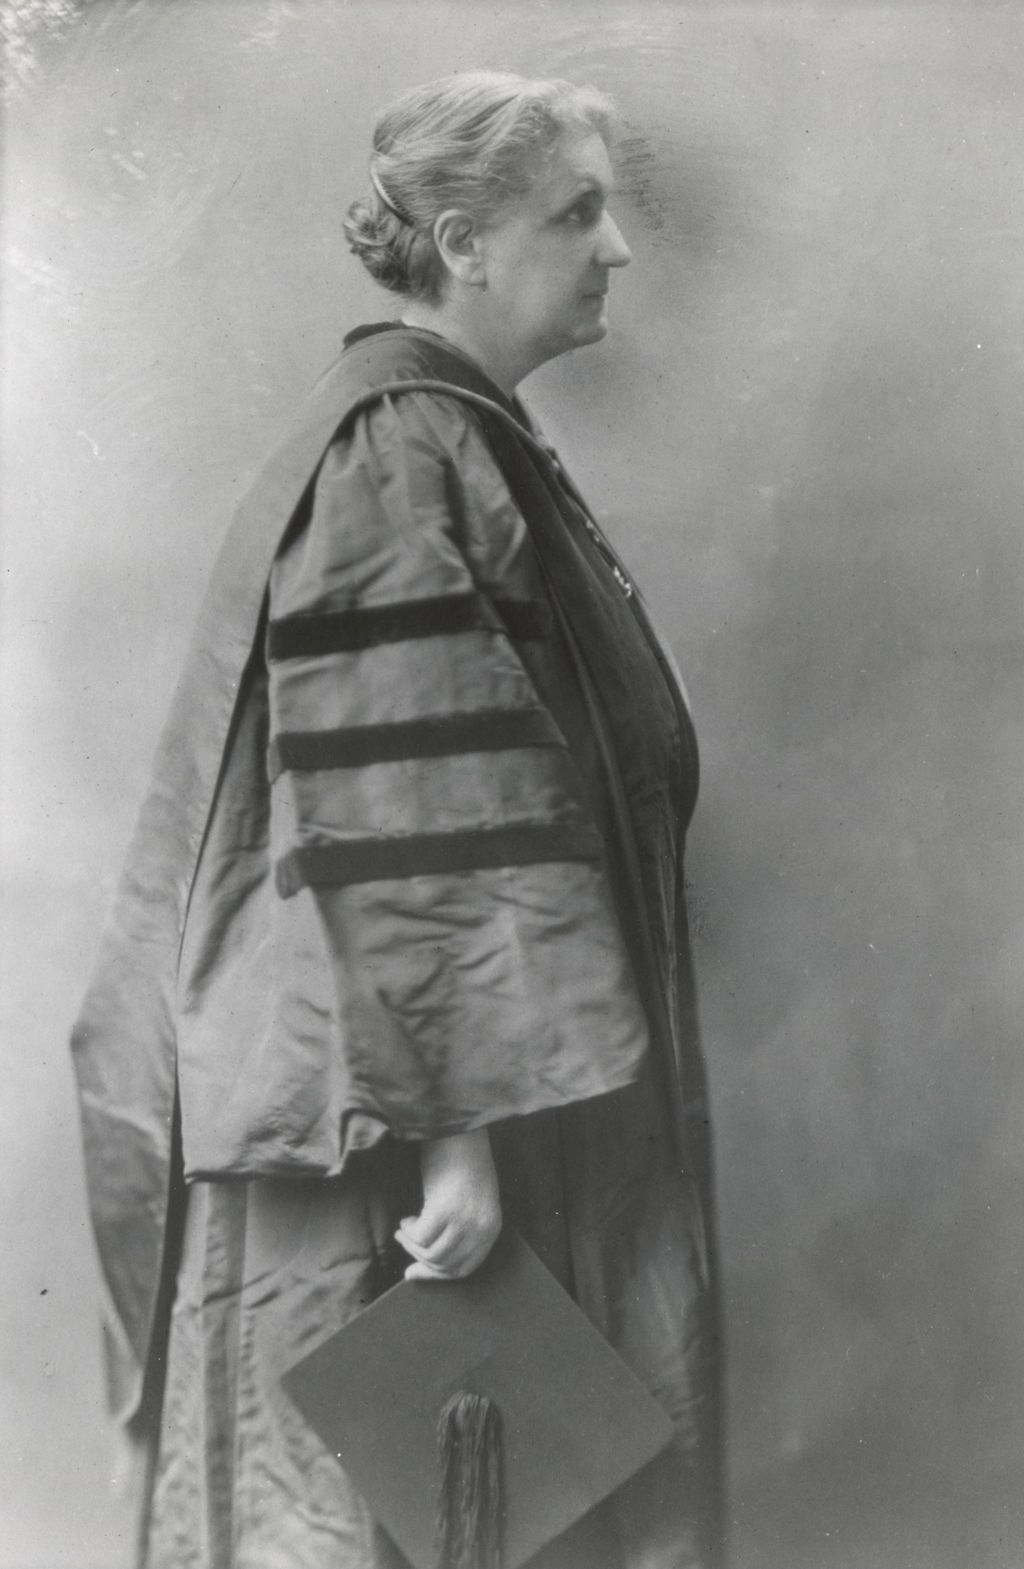 Miniature of Jane Addams in academic robes